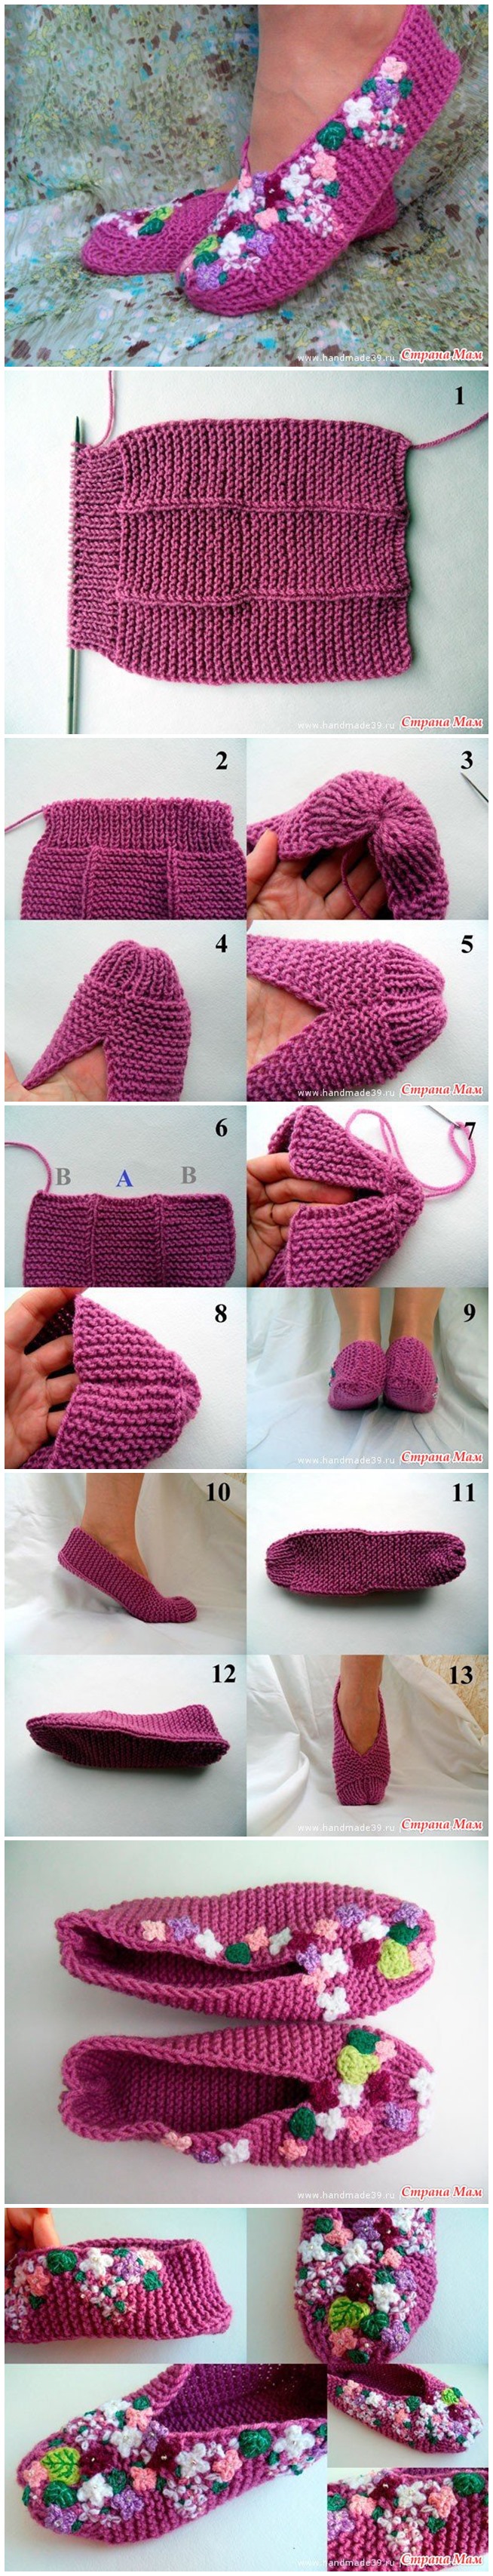 Knit a Useful and Pretty Slipper M Wonderful DIY Pretty  Knitted Lilac Slippers